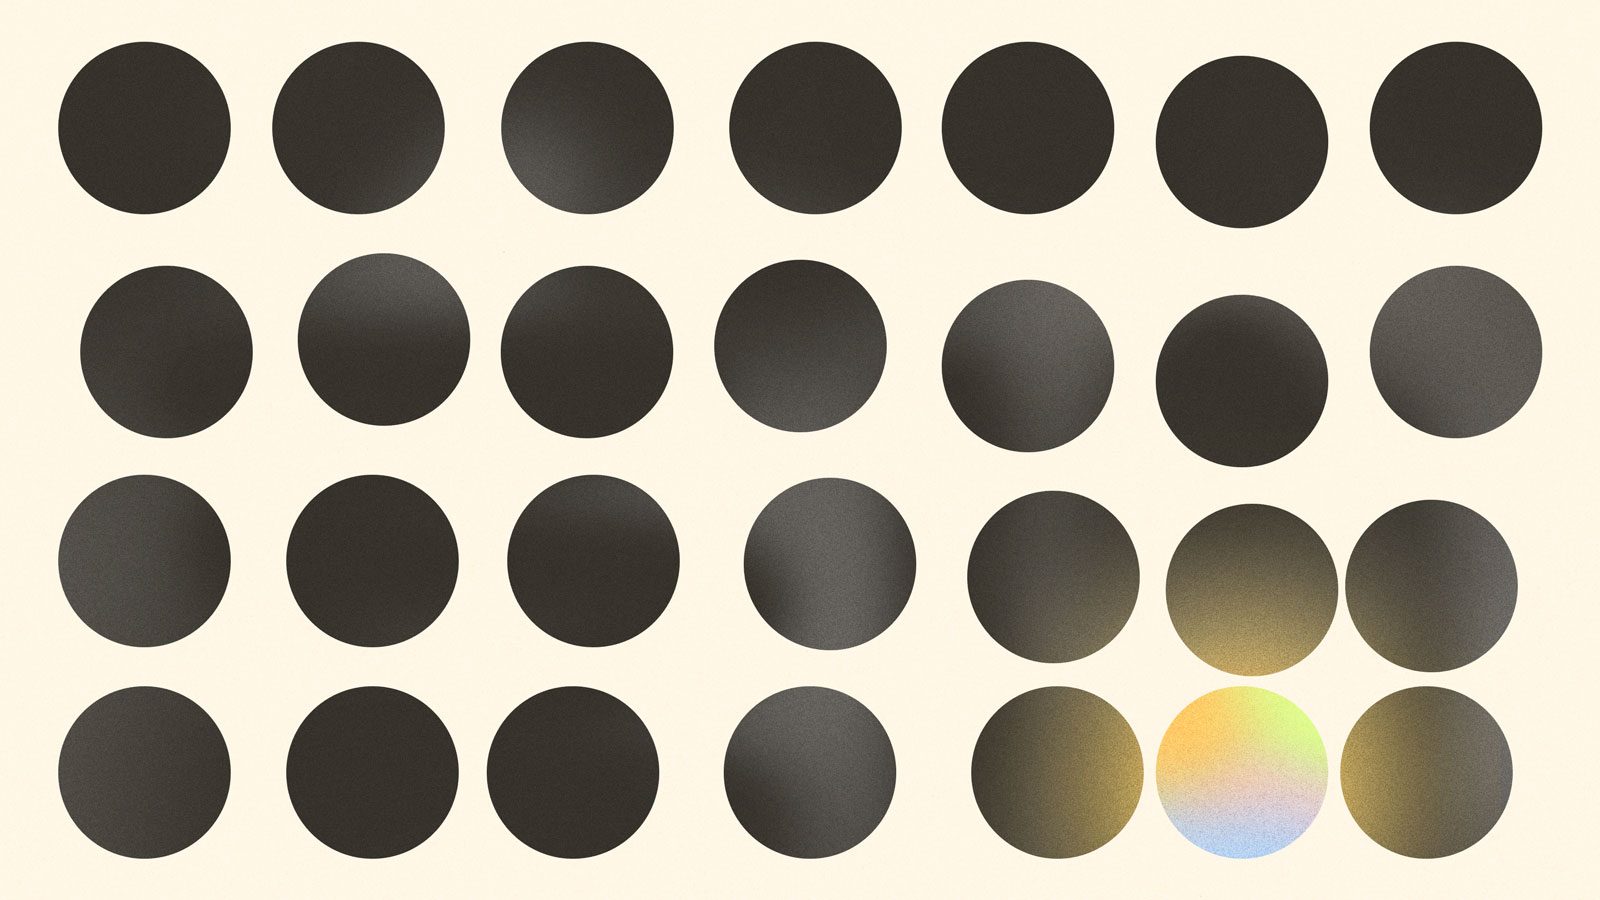 Grid of black circles with one radiant circle in bottom row